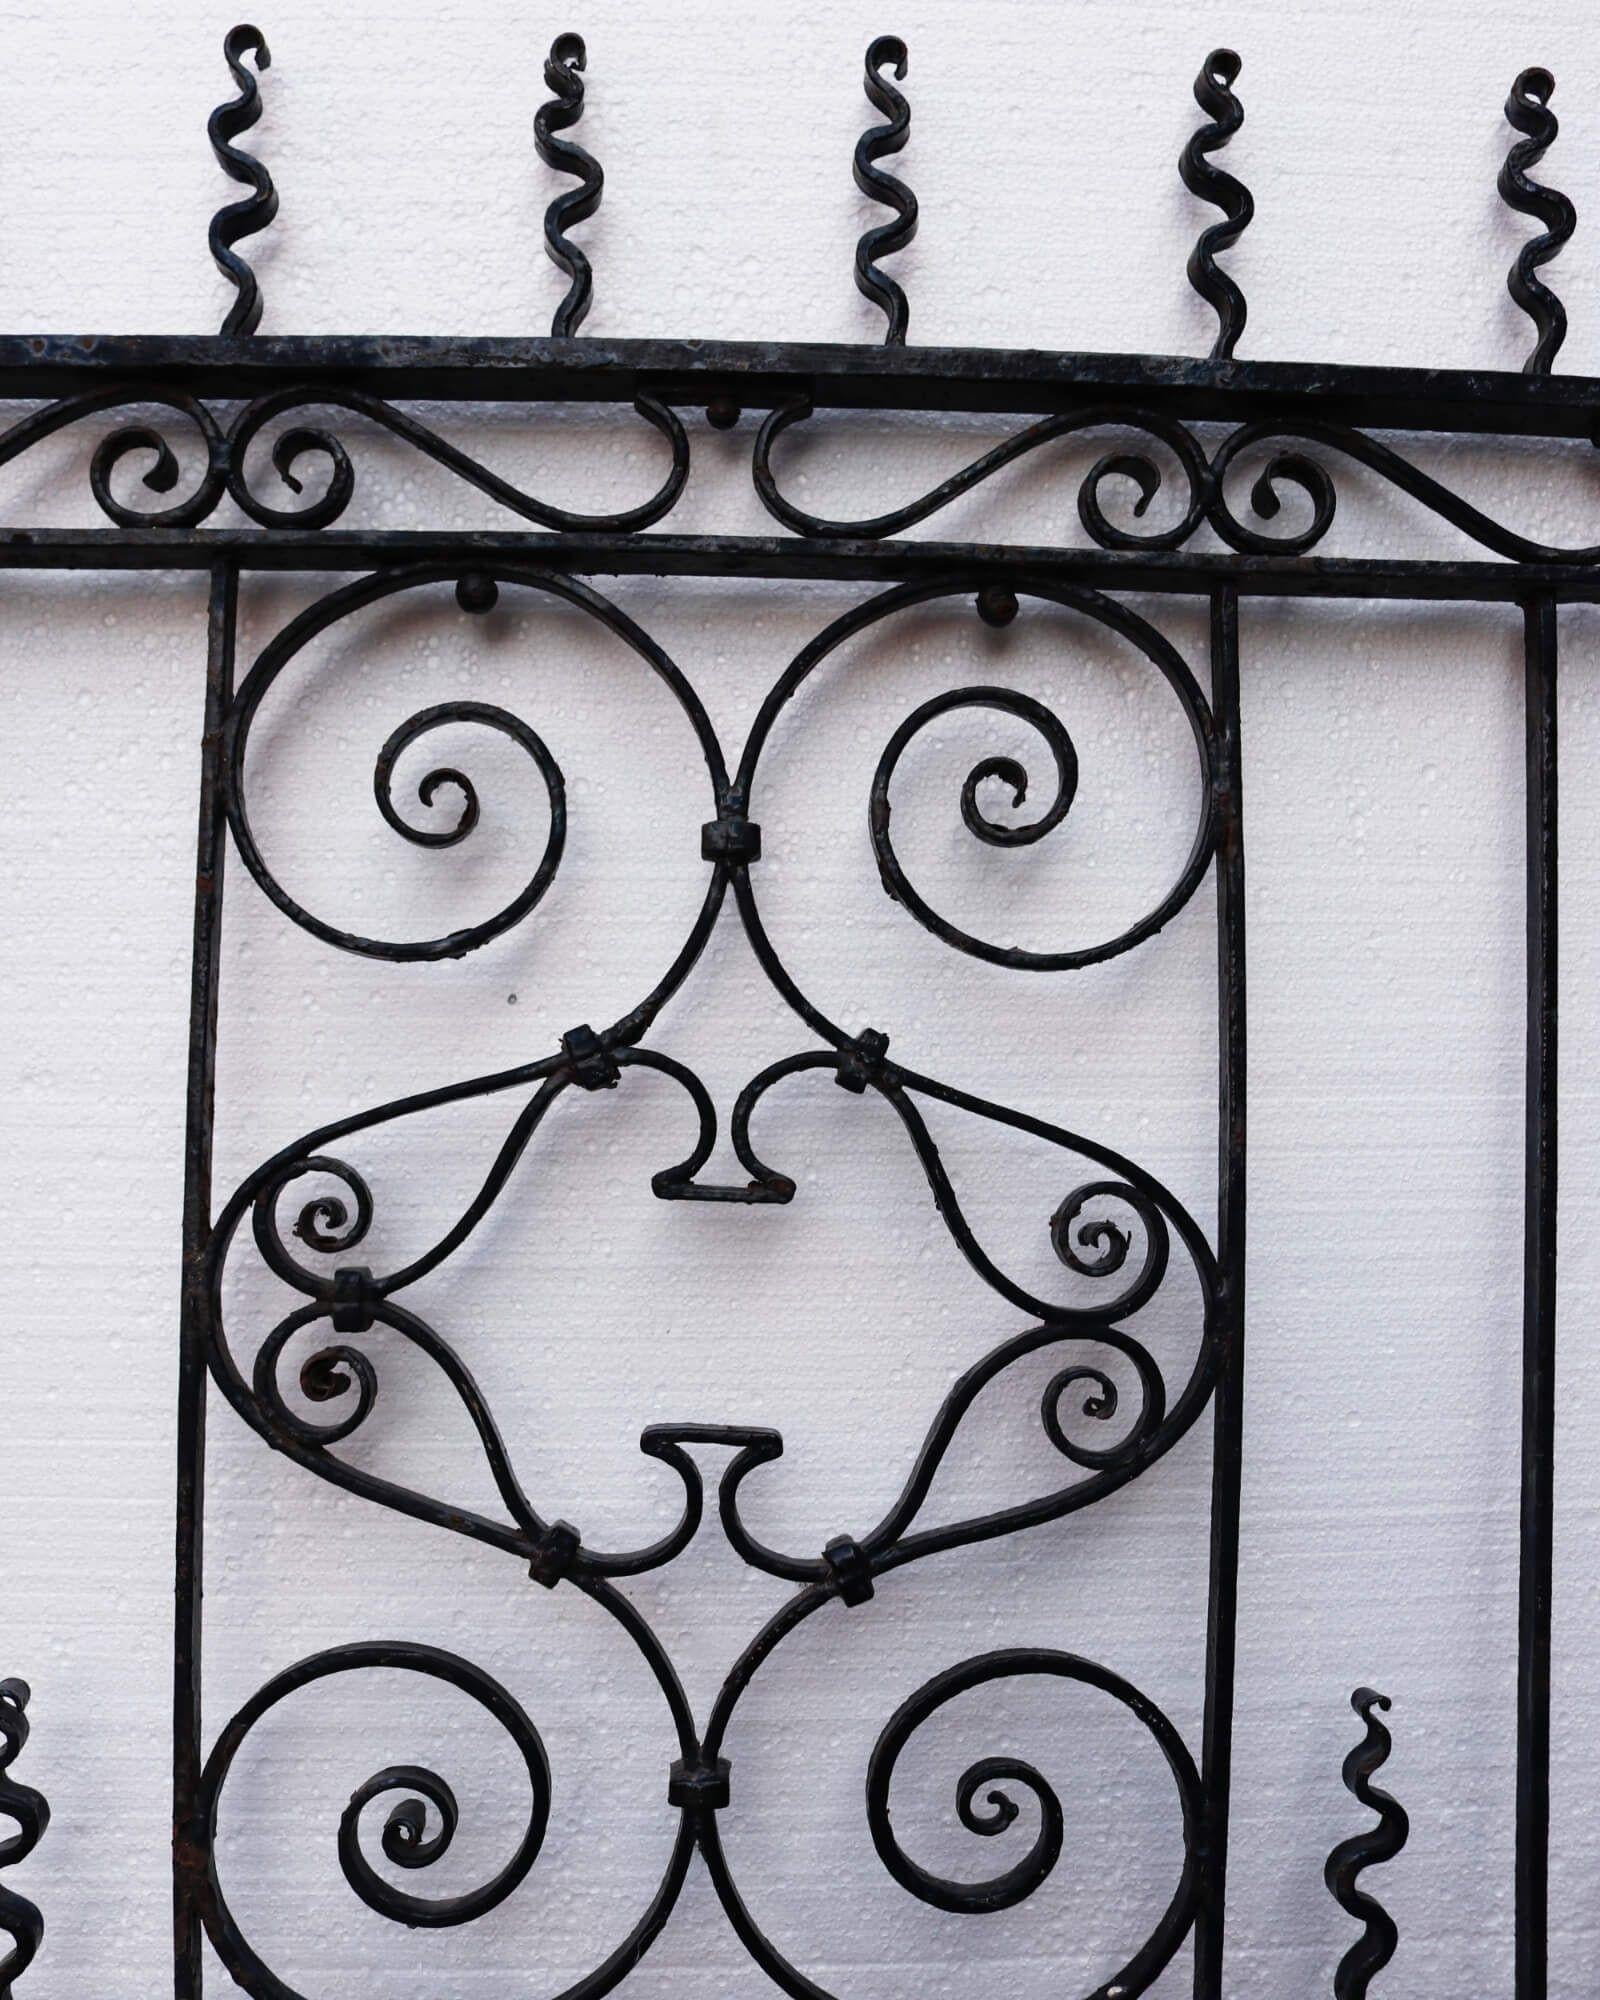 Mid-19th century Georgian wrought iron pedestrian gate with a wavy design. This gate’s large size, tall stature, and unusual design would leave a quirky aspect to any English property. Scrolls hold their place on both ends, while its centre holds